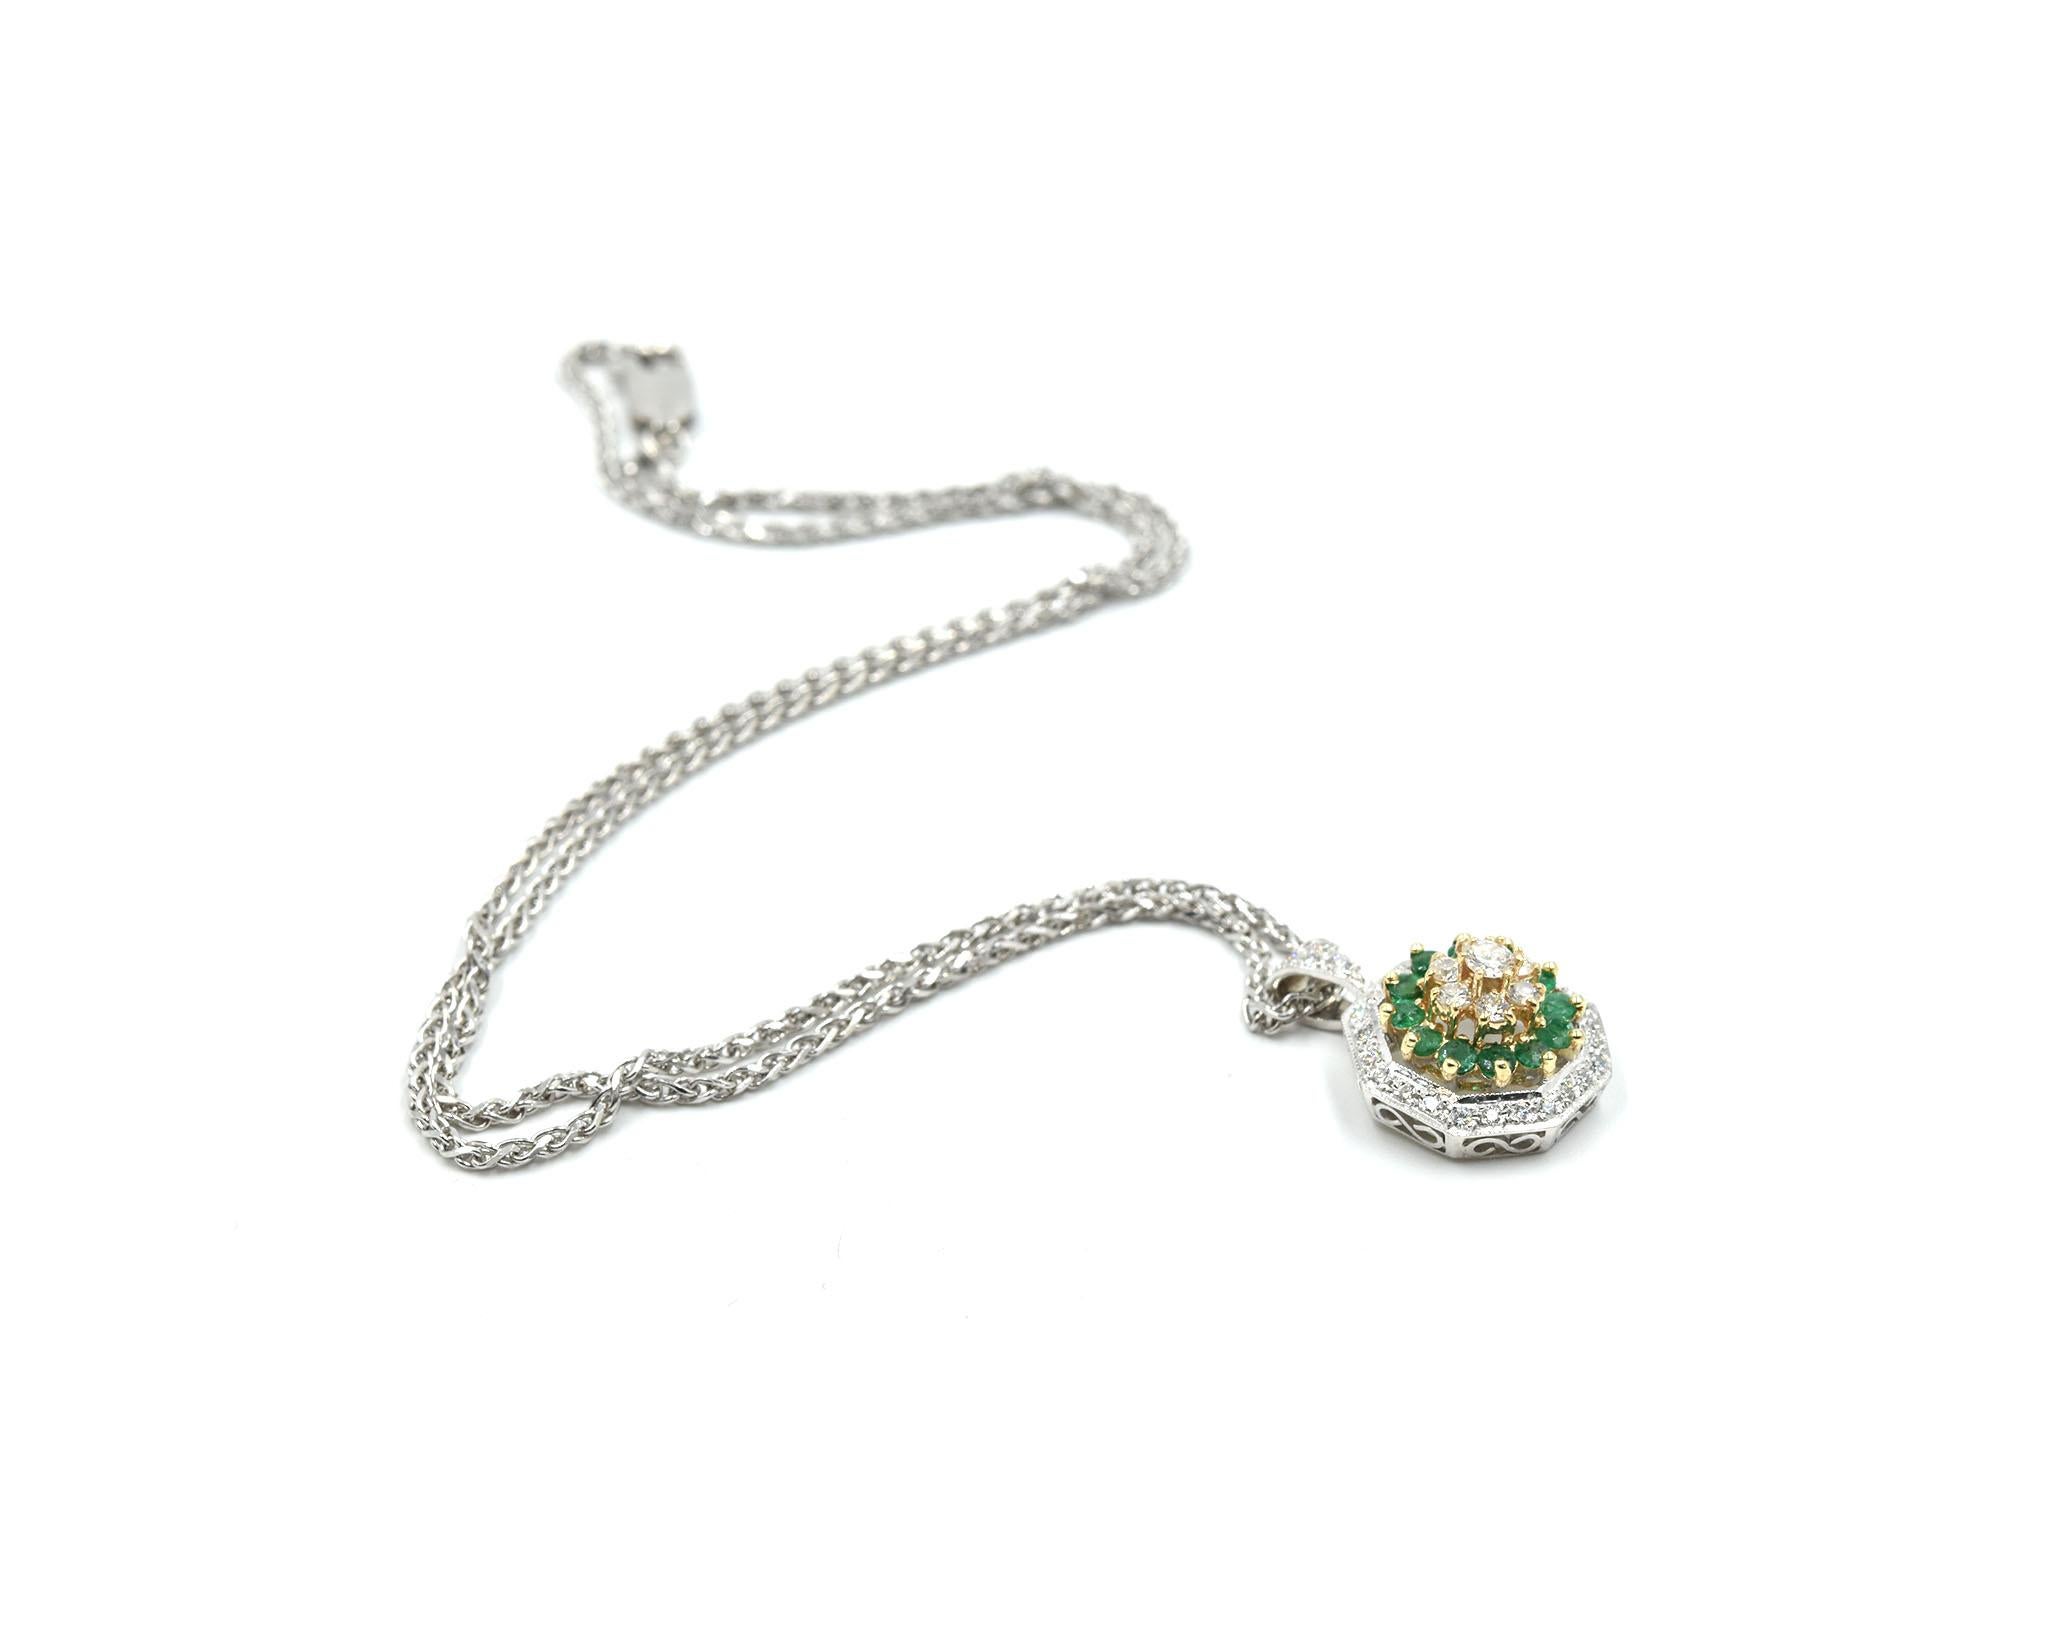 This necklace is made in 14k yellow and white gold. It features 35 round brilliant-cut diamonds with a total weight of 0.57ct. It also features 12 emerald stones with a total weight of 0.60ct. The pendant is an octagon shape and measures 15x21.5mm